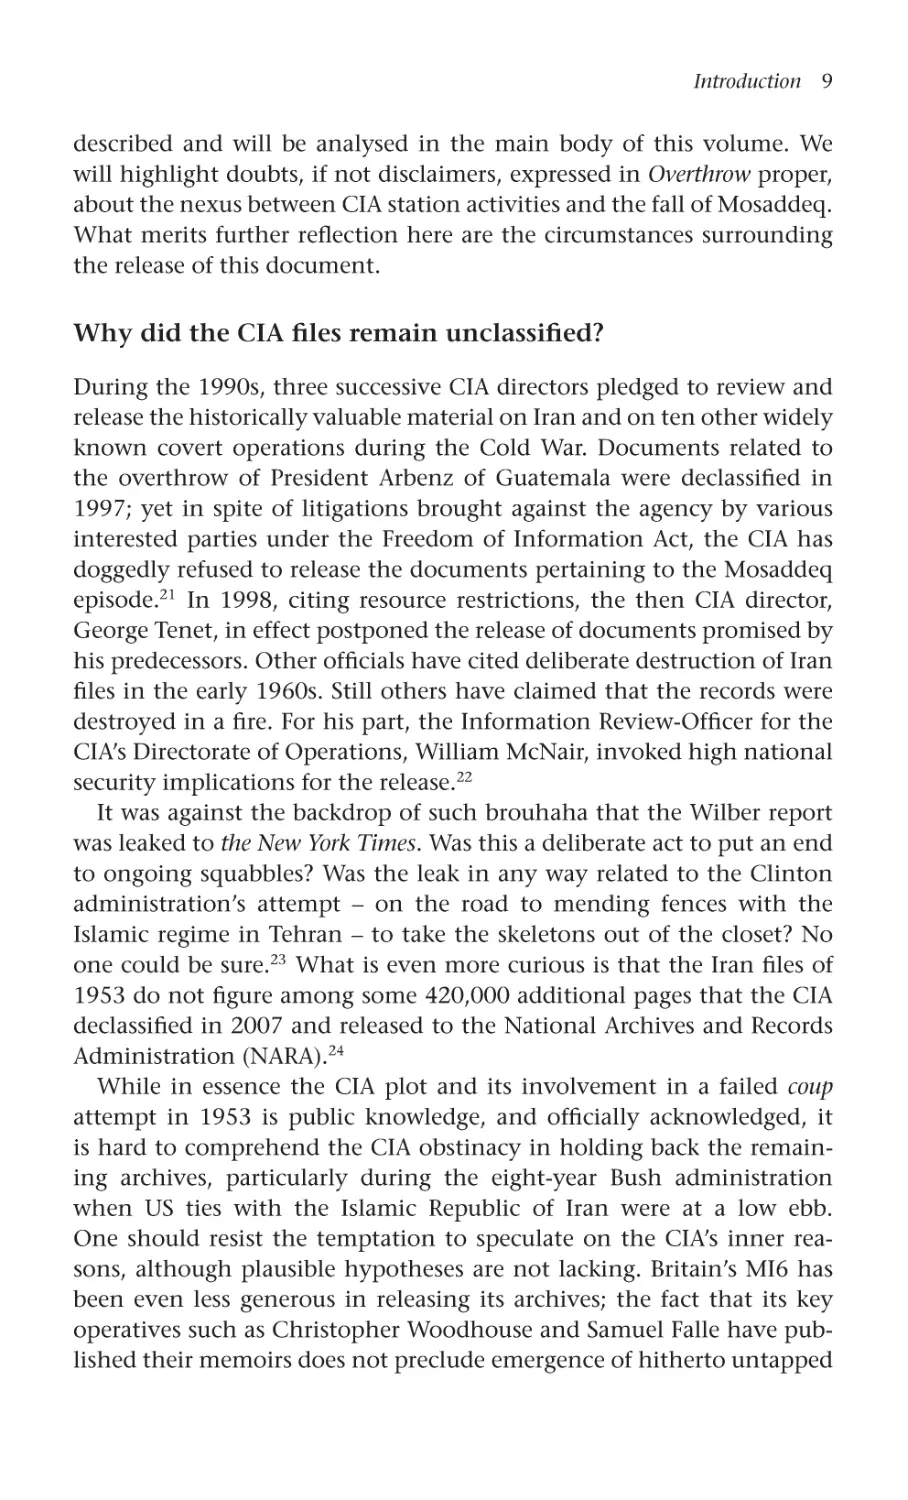 Why did the CIA files remain unclassified?